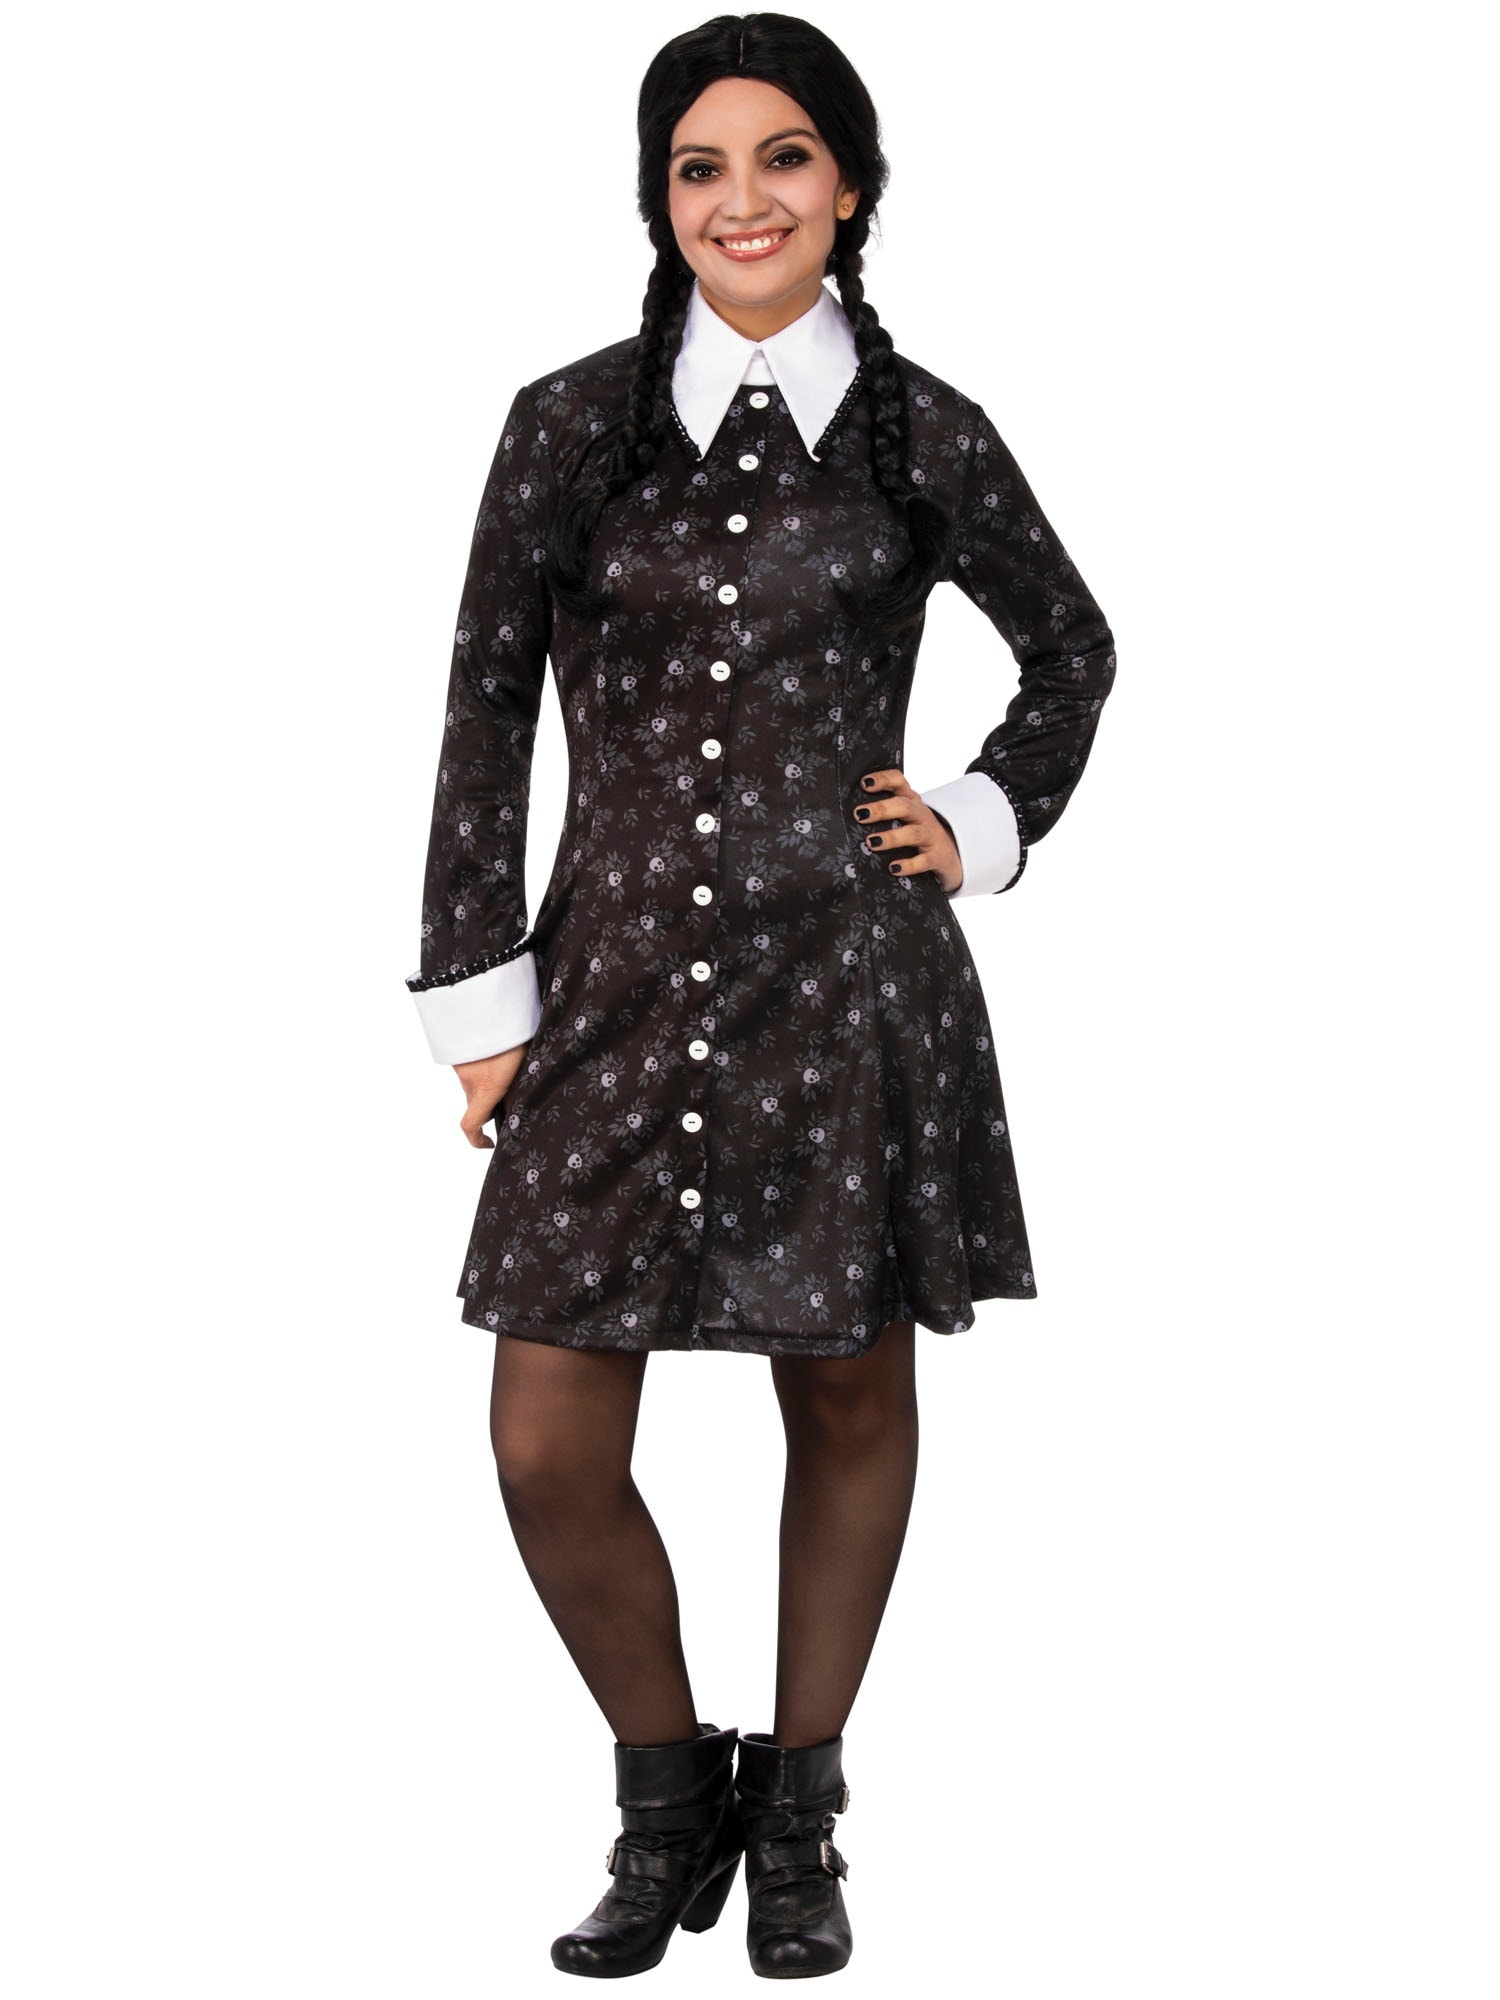 Wednesday Addams from Wednesday Costume, Carbon Costume